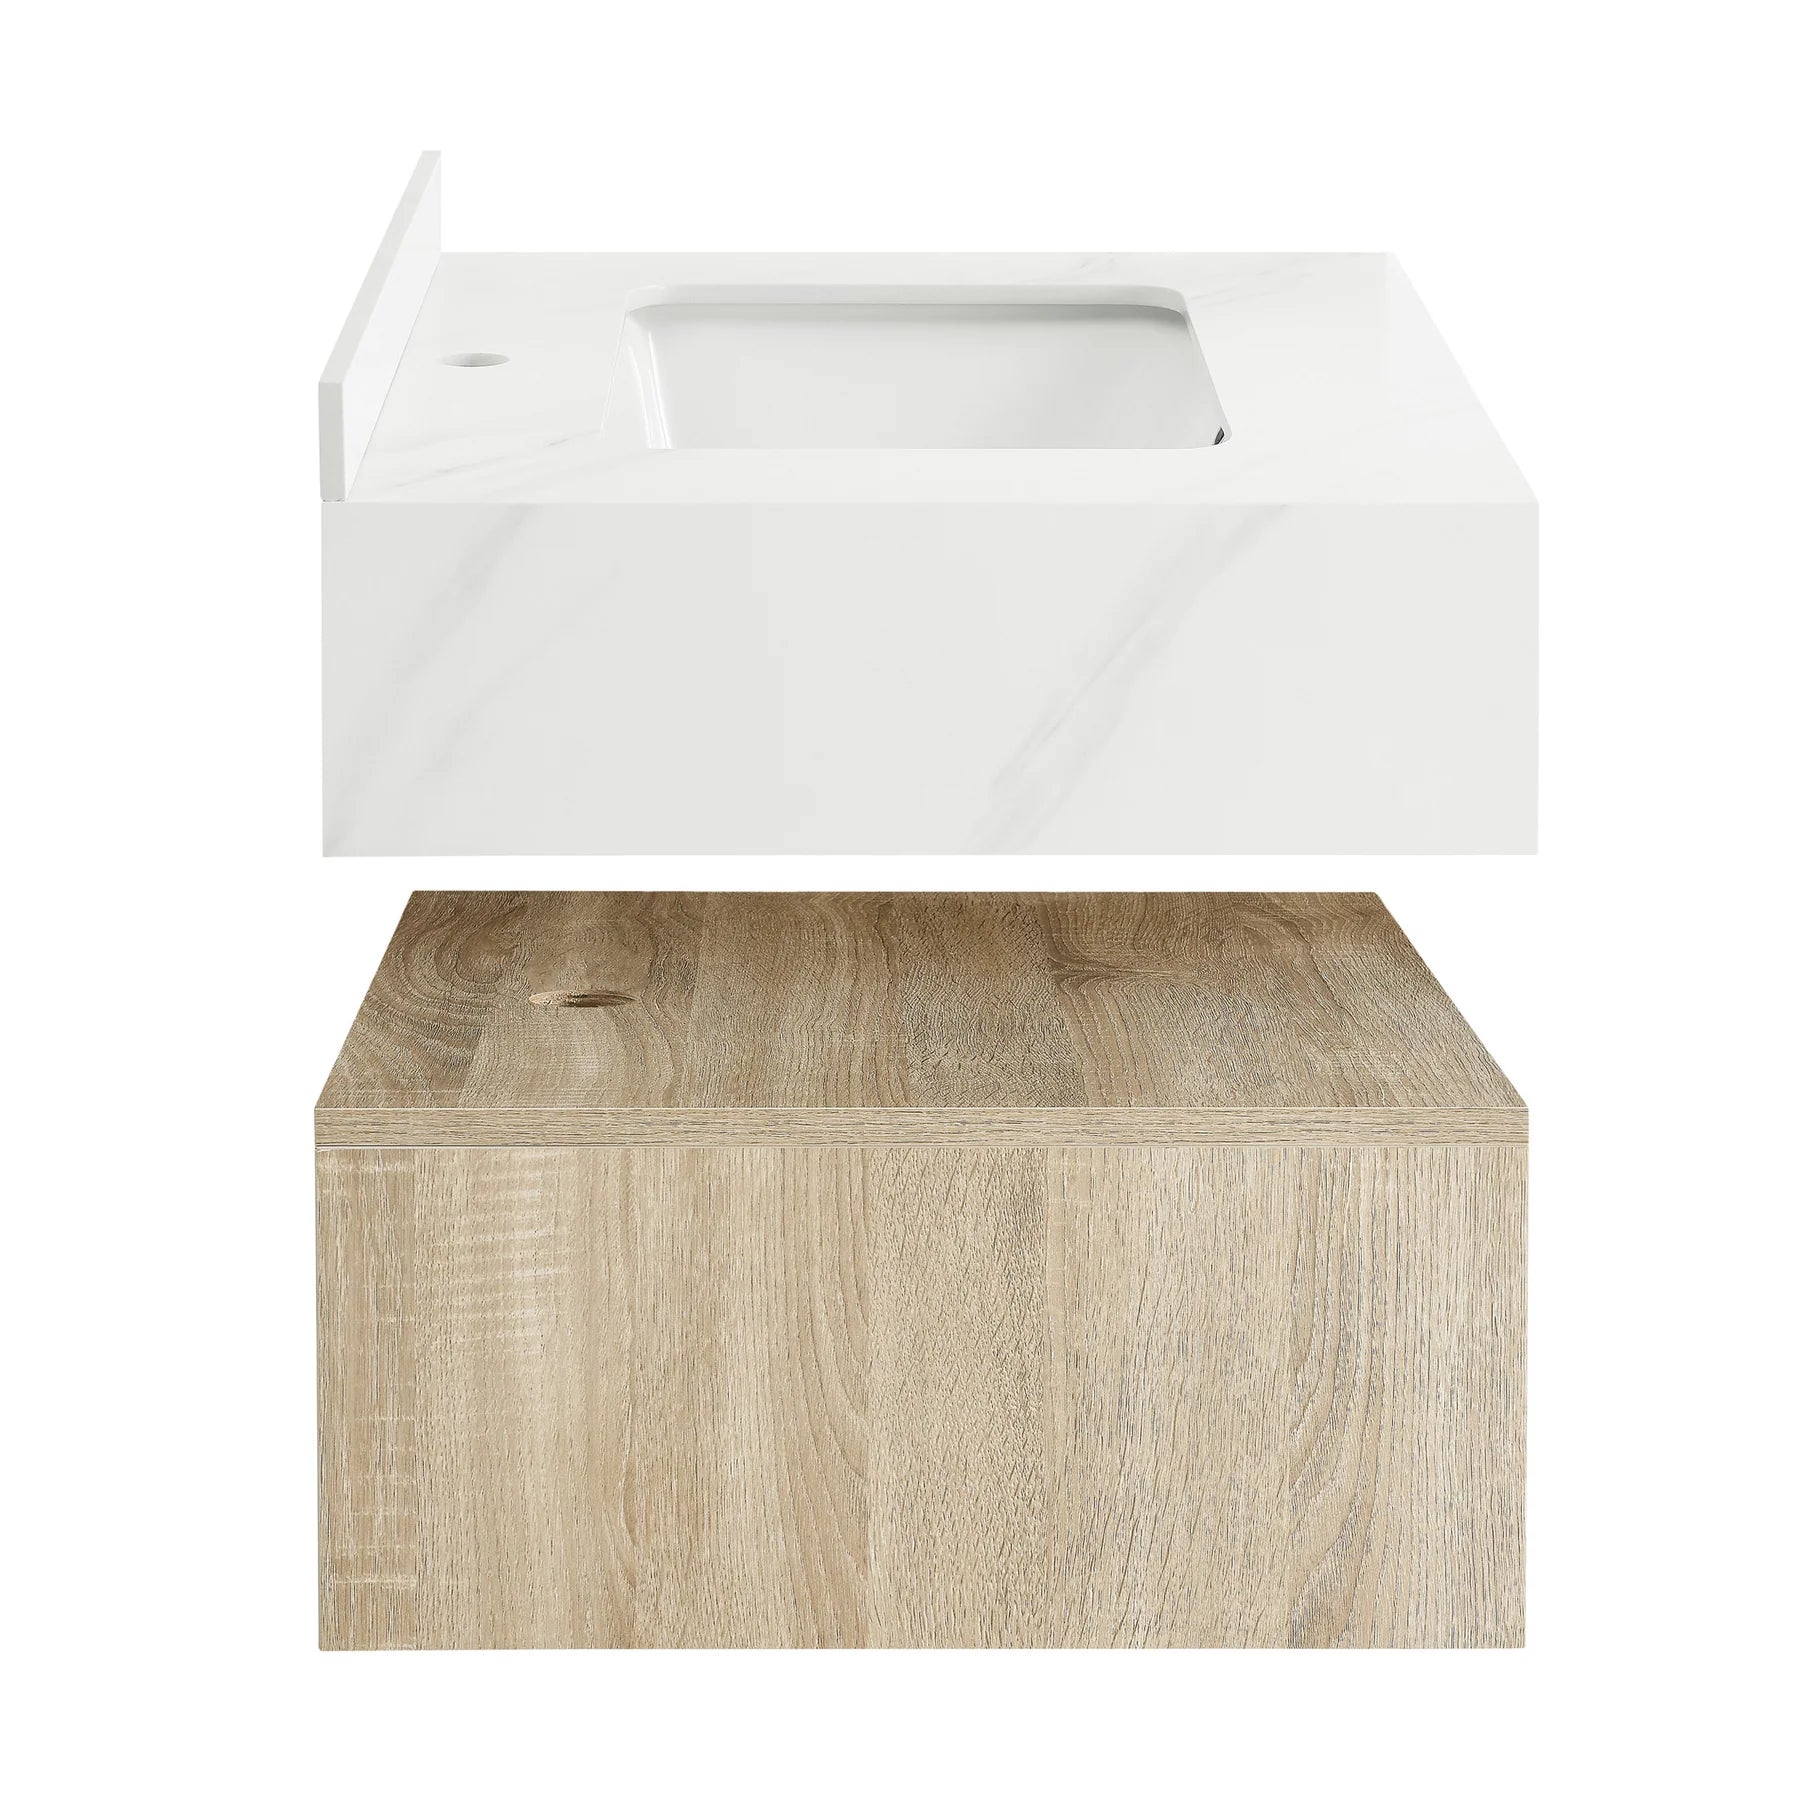 Swiss Madison ﻿Avancer 24" Wall-Mounted Bathroom Vanity in Calacatta and White Oak - SM-BV700